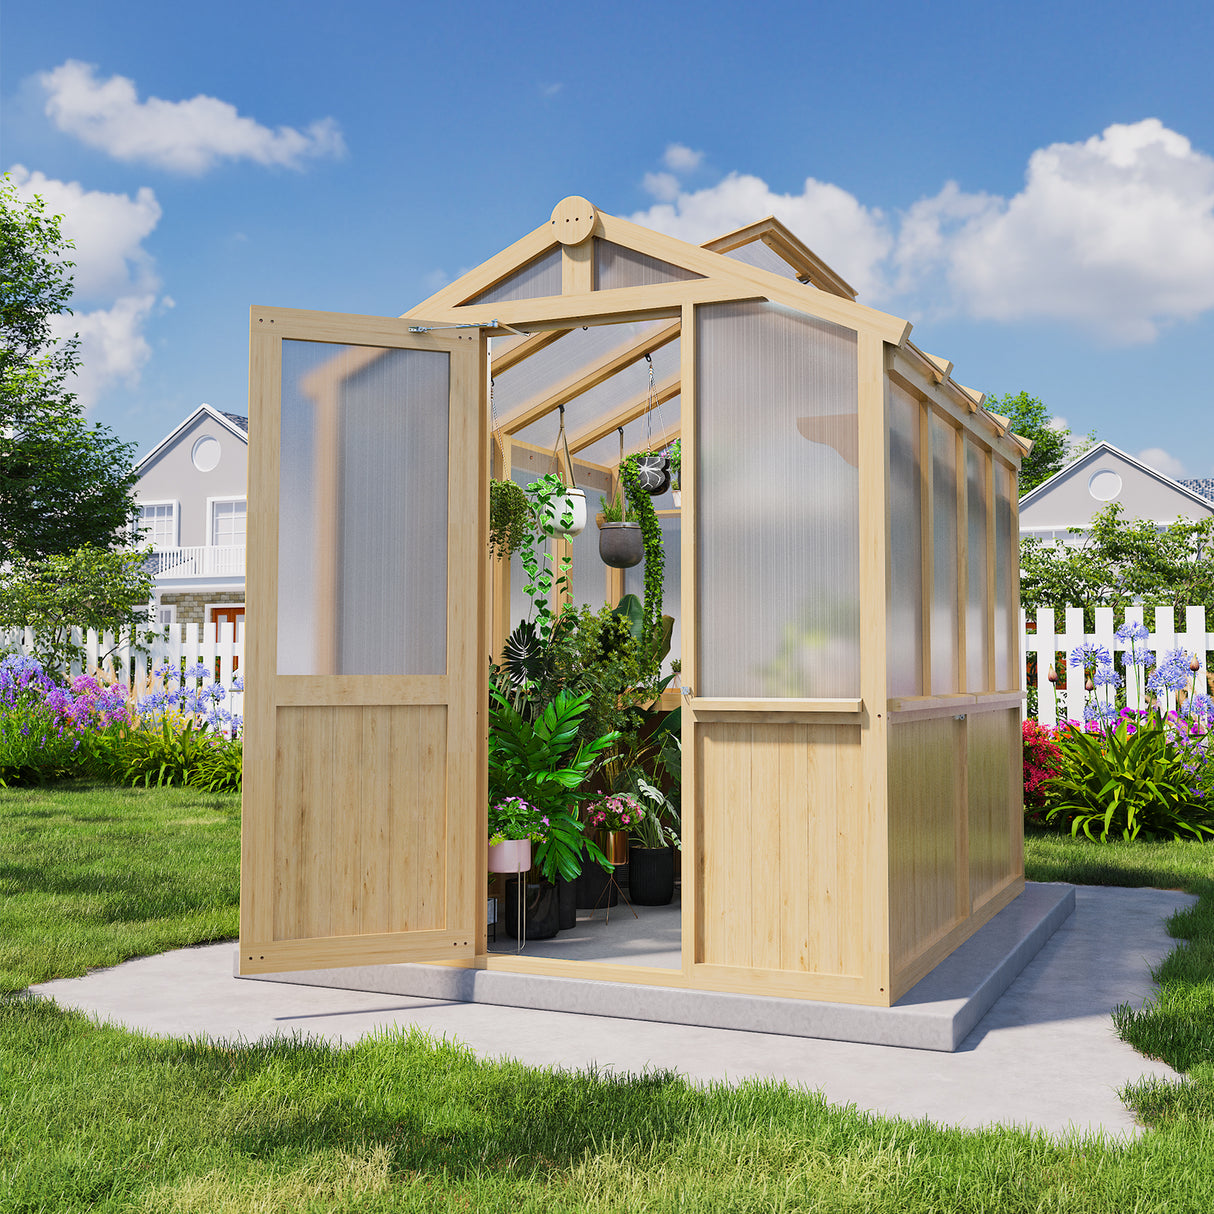 EAGLE PEAK 7.5x6.7x7.7 Wood and Polycarbonate Walk-in Greenhouse